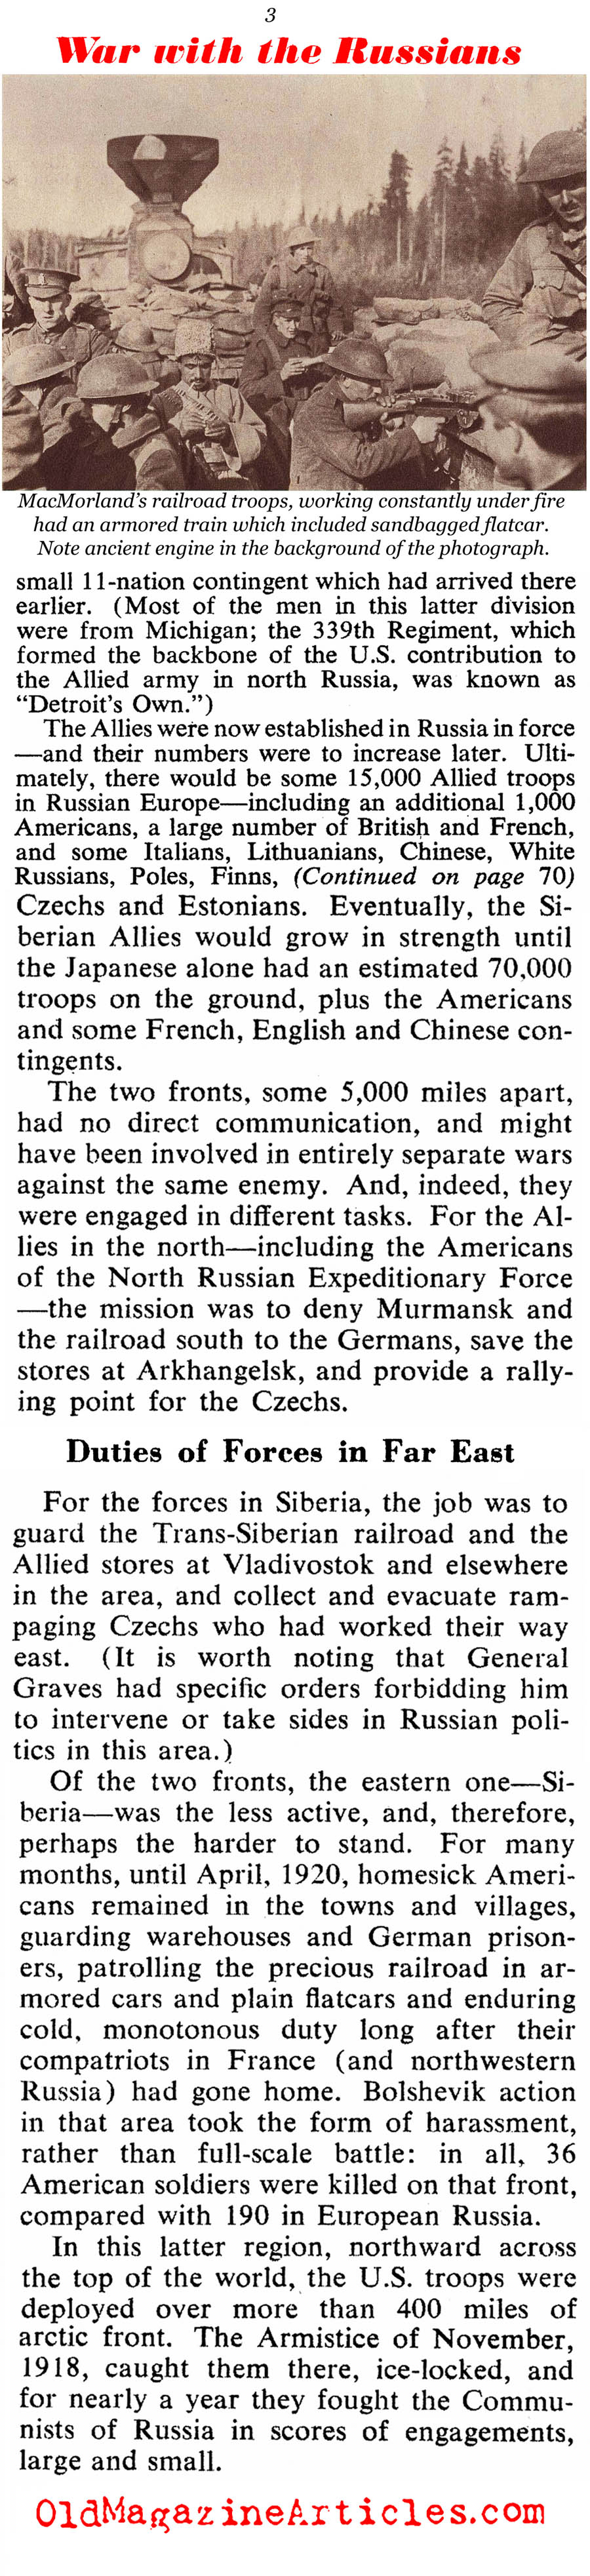 ''Our First War With The Russians'' (Collier's Magazine, 1951)